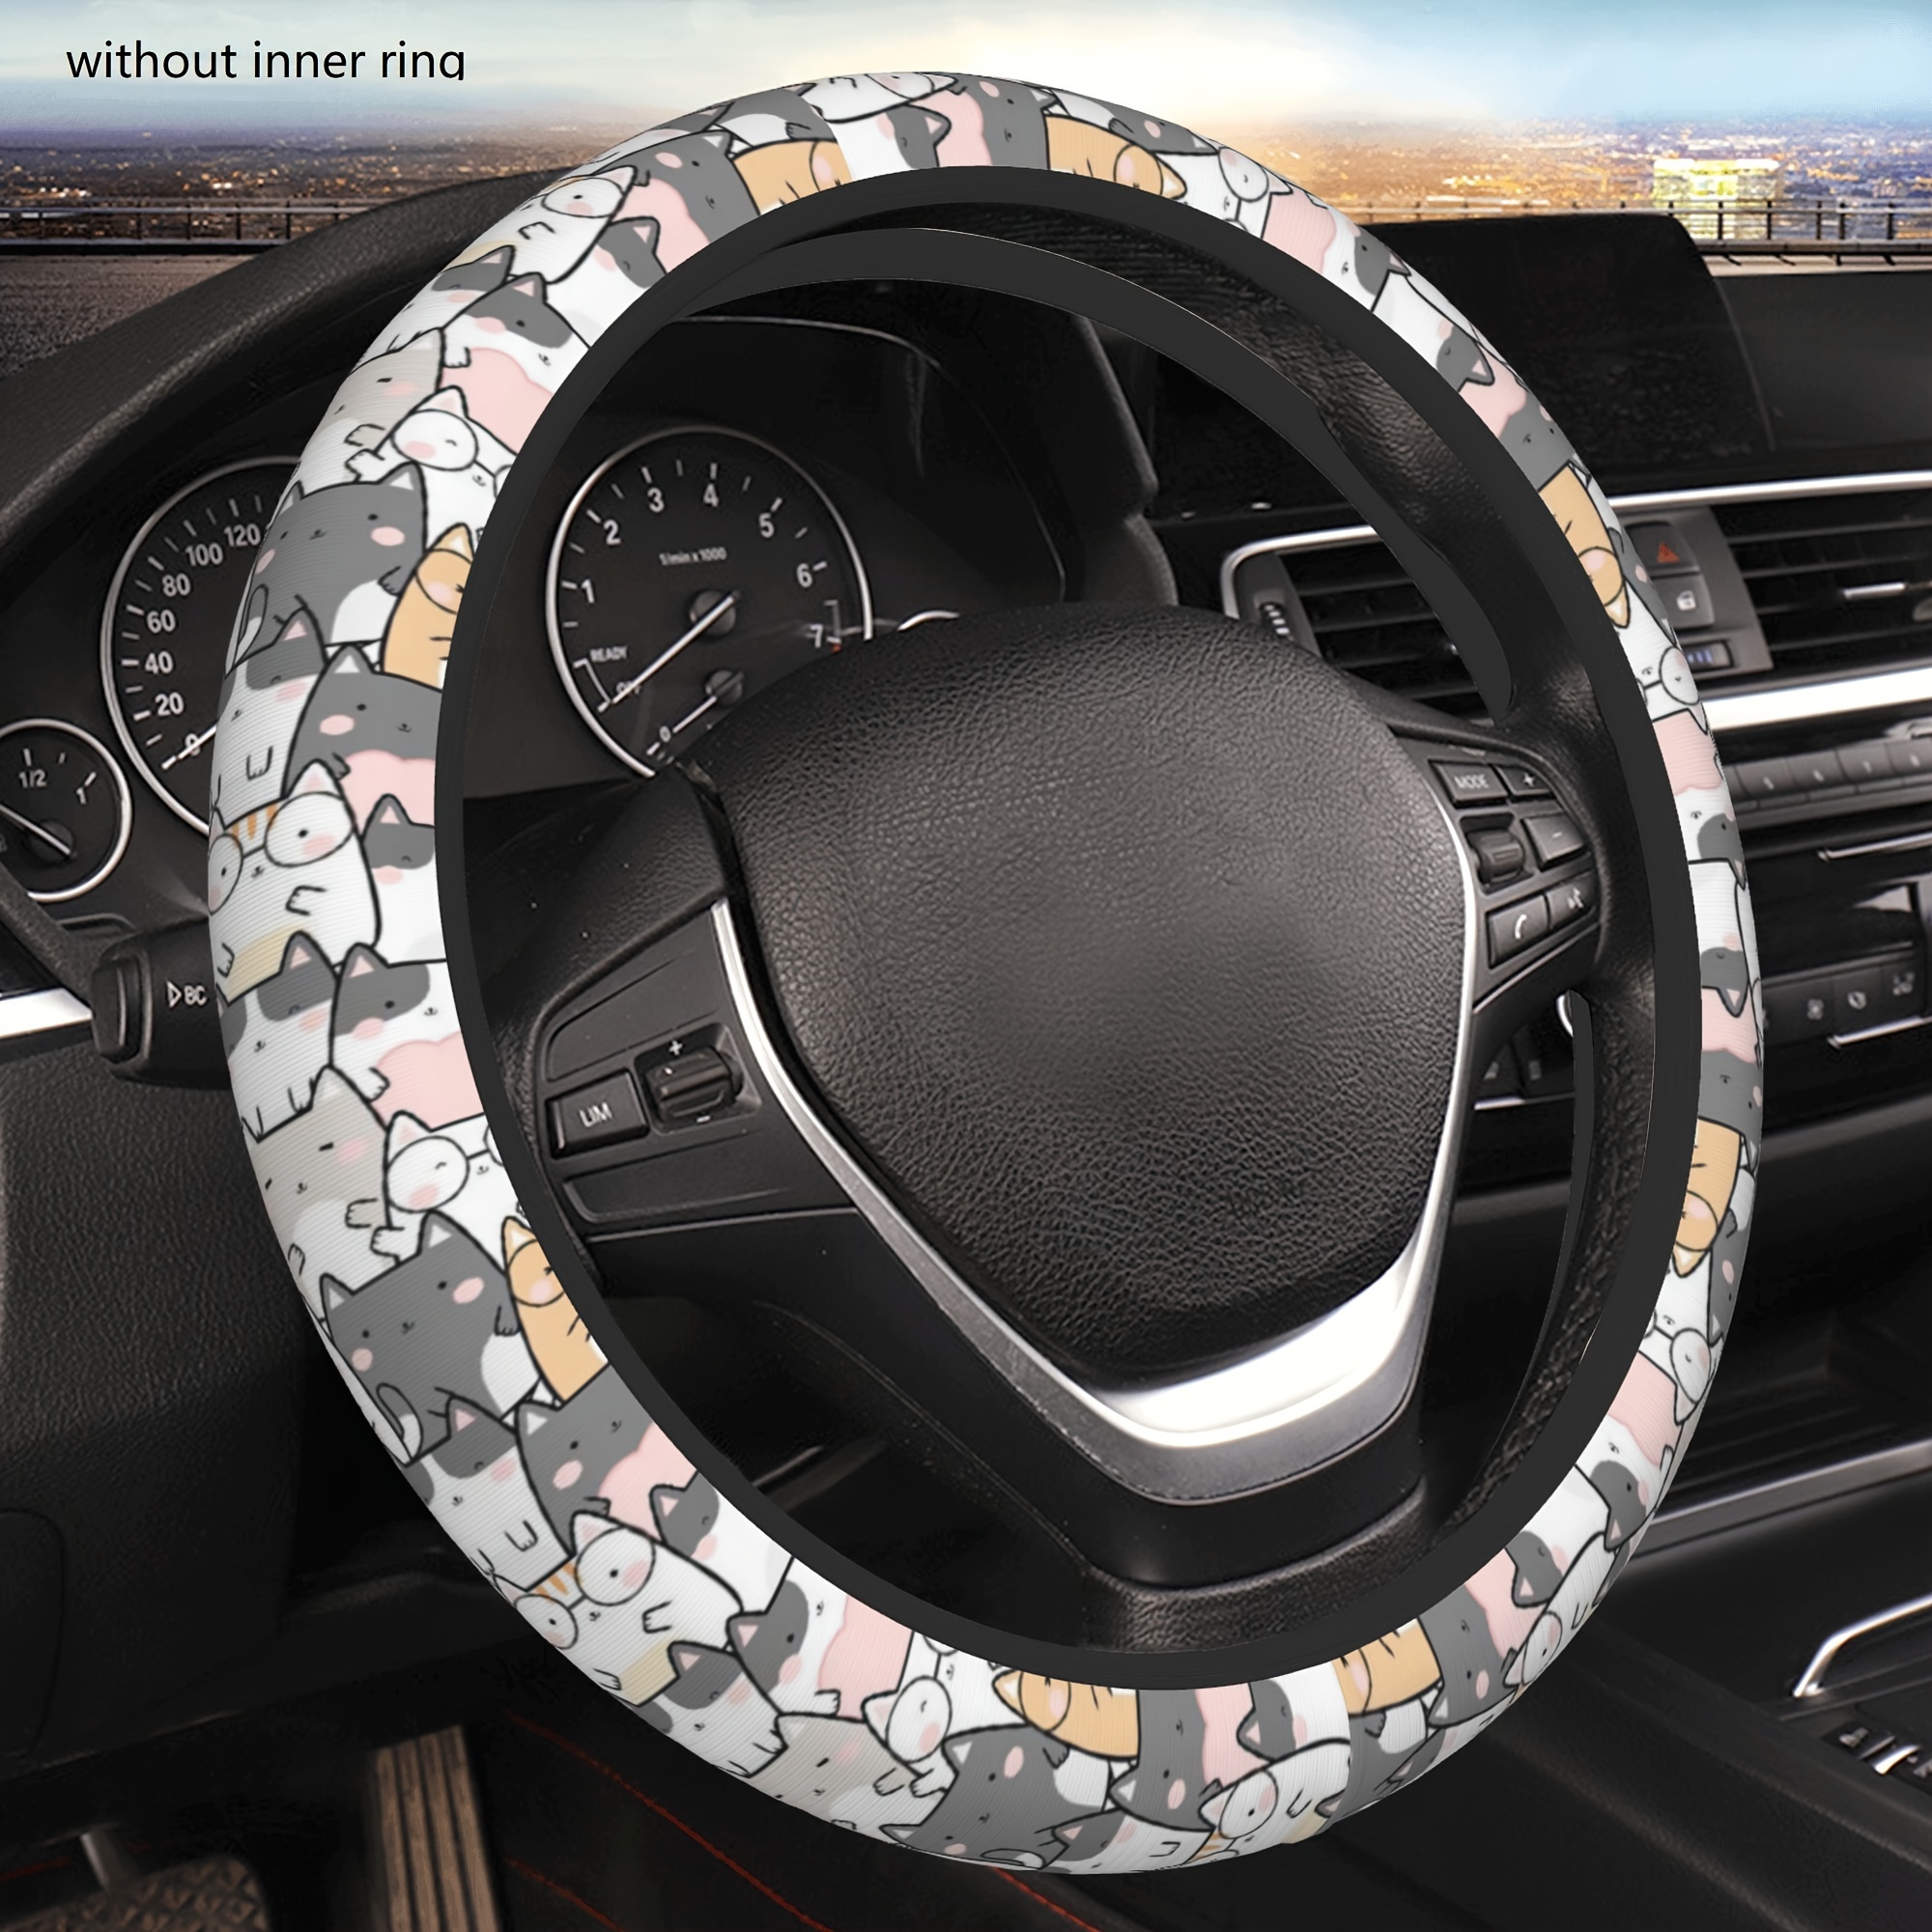 Fluffy Steering Wheel Cover, Non-Slip Warm Soft and Comfortable No  Shedding, Car Steering Wheel Cover for Women, Universal Plush Soft  Comfortable Car